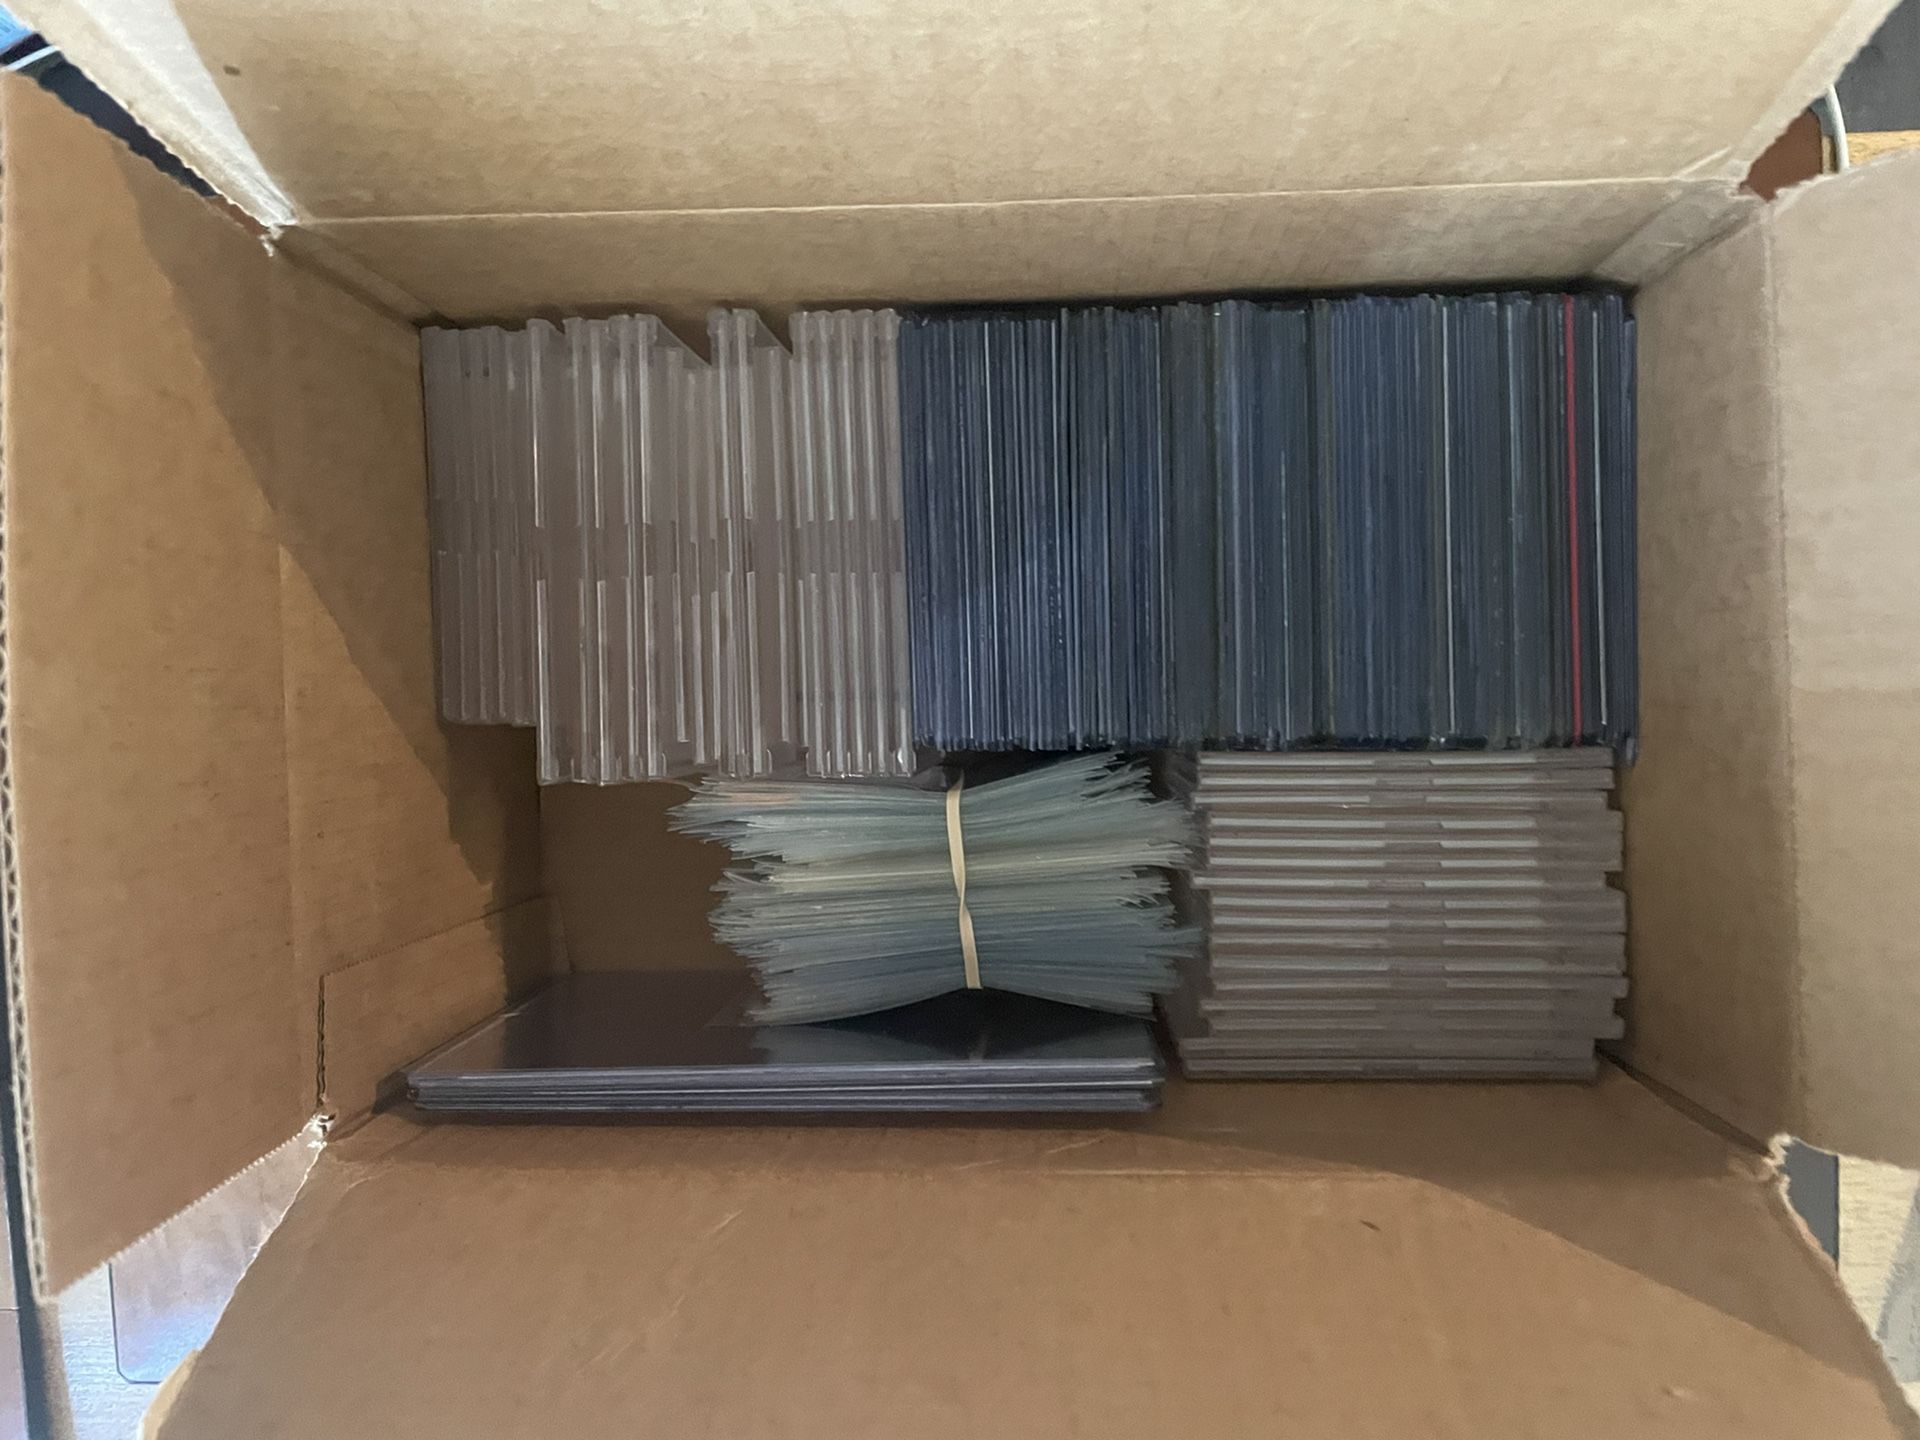 Hundreds Of Used Toploaders, Cases and Penny Sleeves 